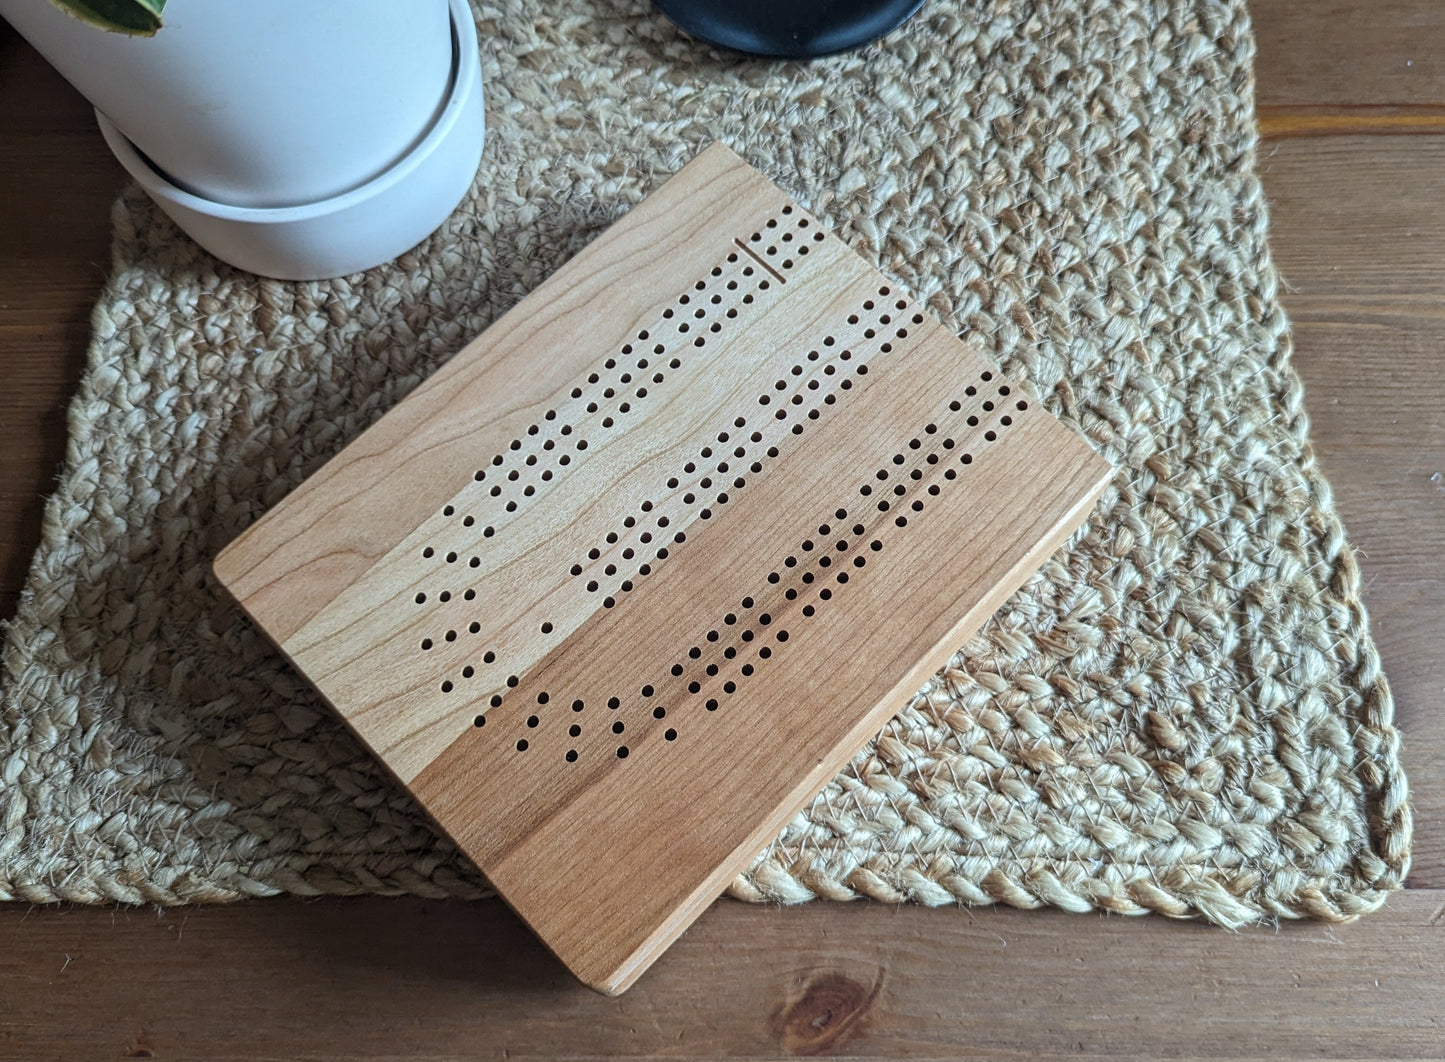 Portable Cribbage Board 3 track - Canadian cherry